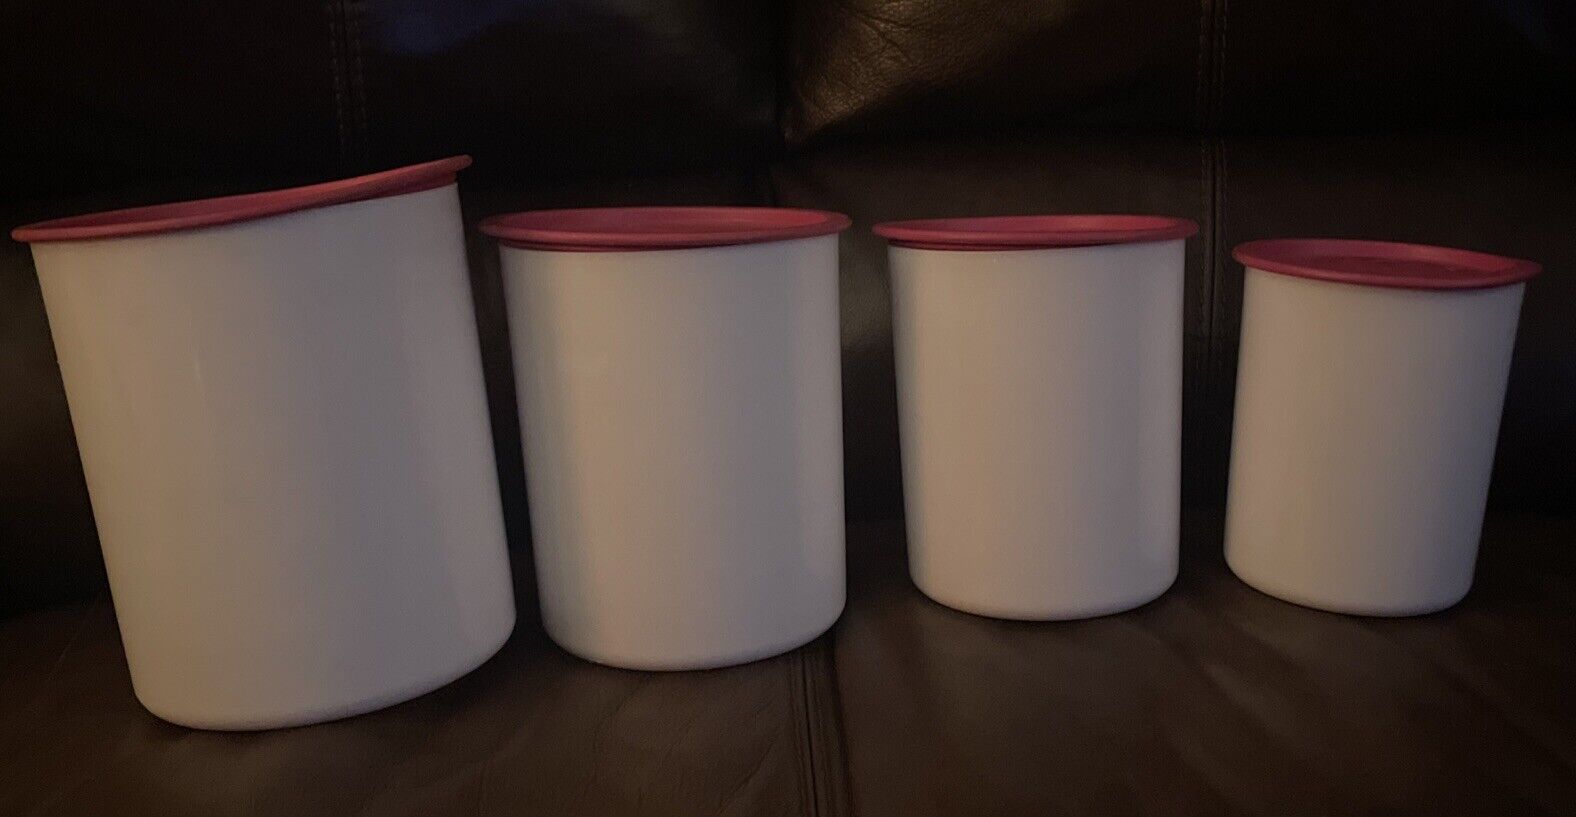 Tupperware Canister Set of 4 White Pink Mauve Lids Made in USA ABCD Vintage